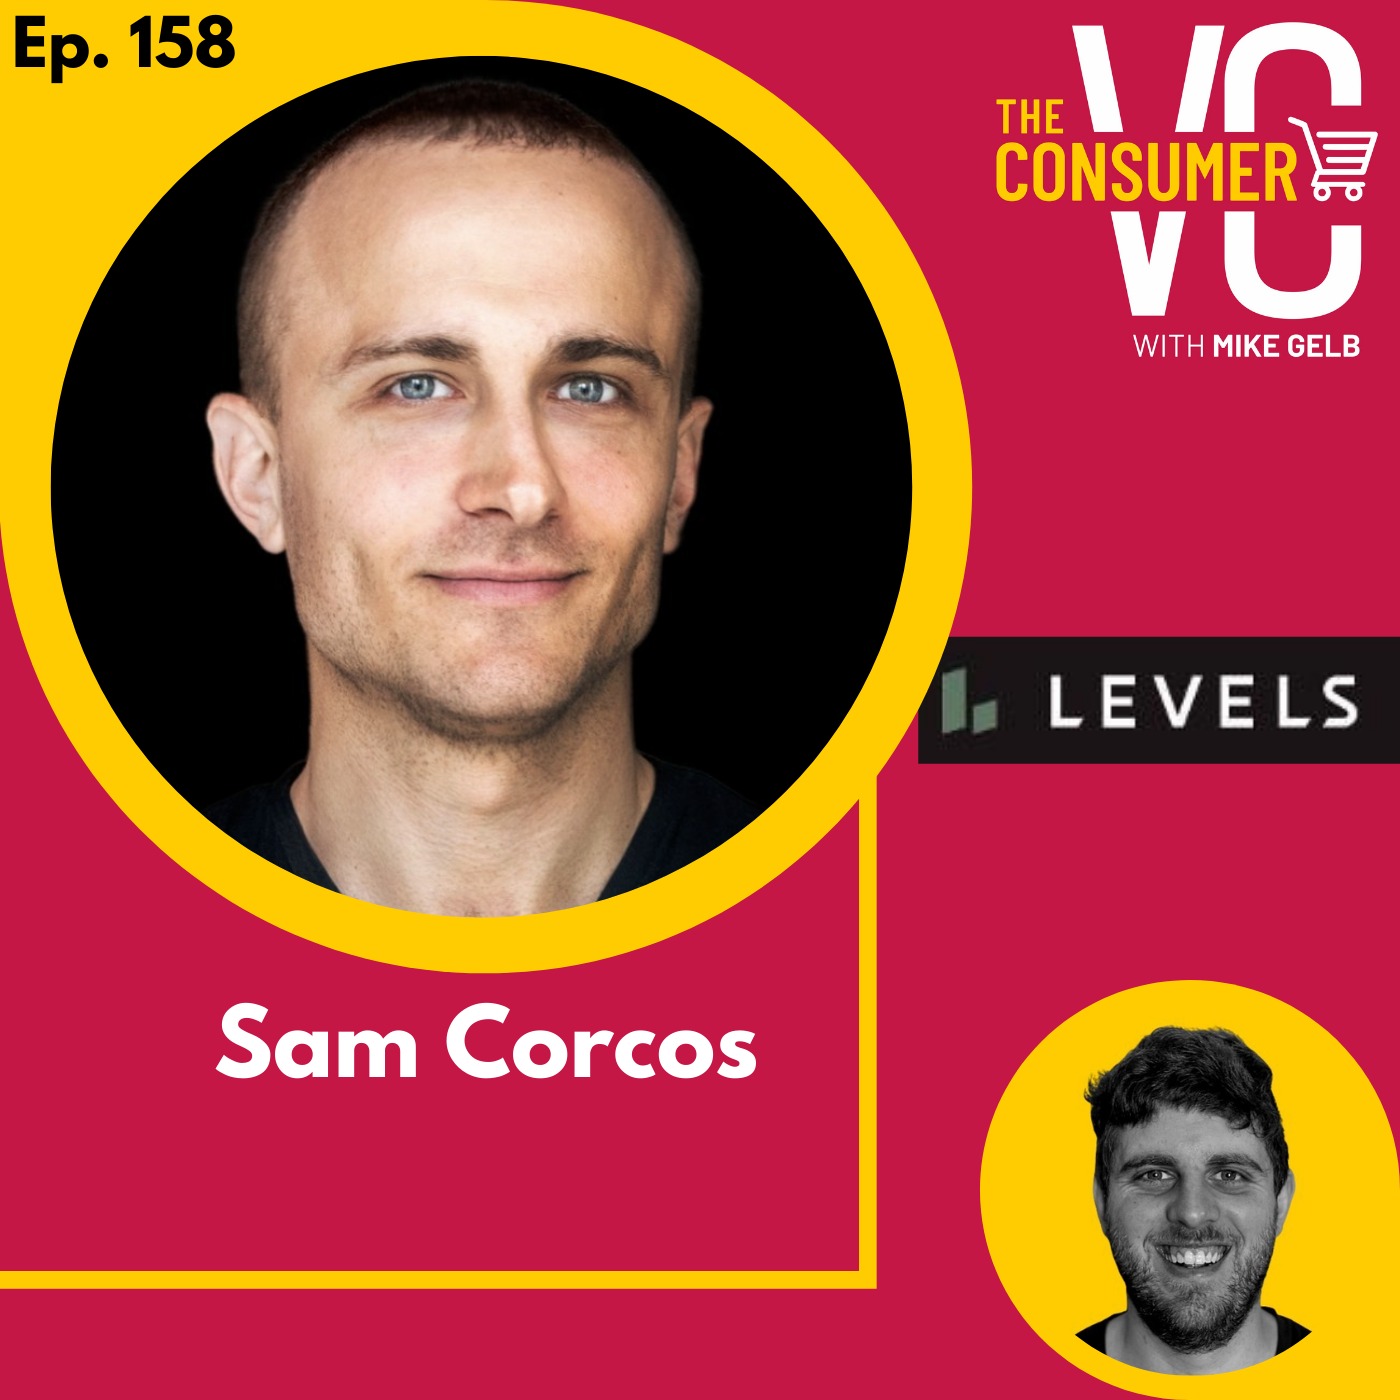 Sam Corcos (Levels) - Tracking how your diet affects your health through wearables